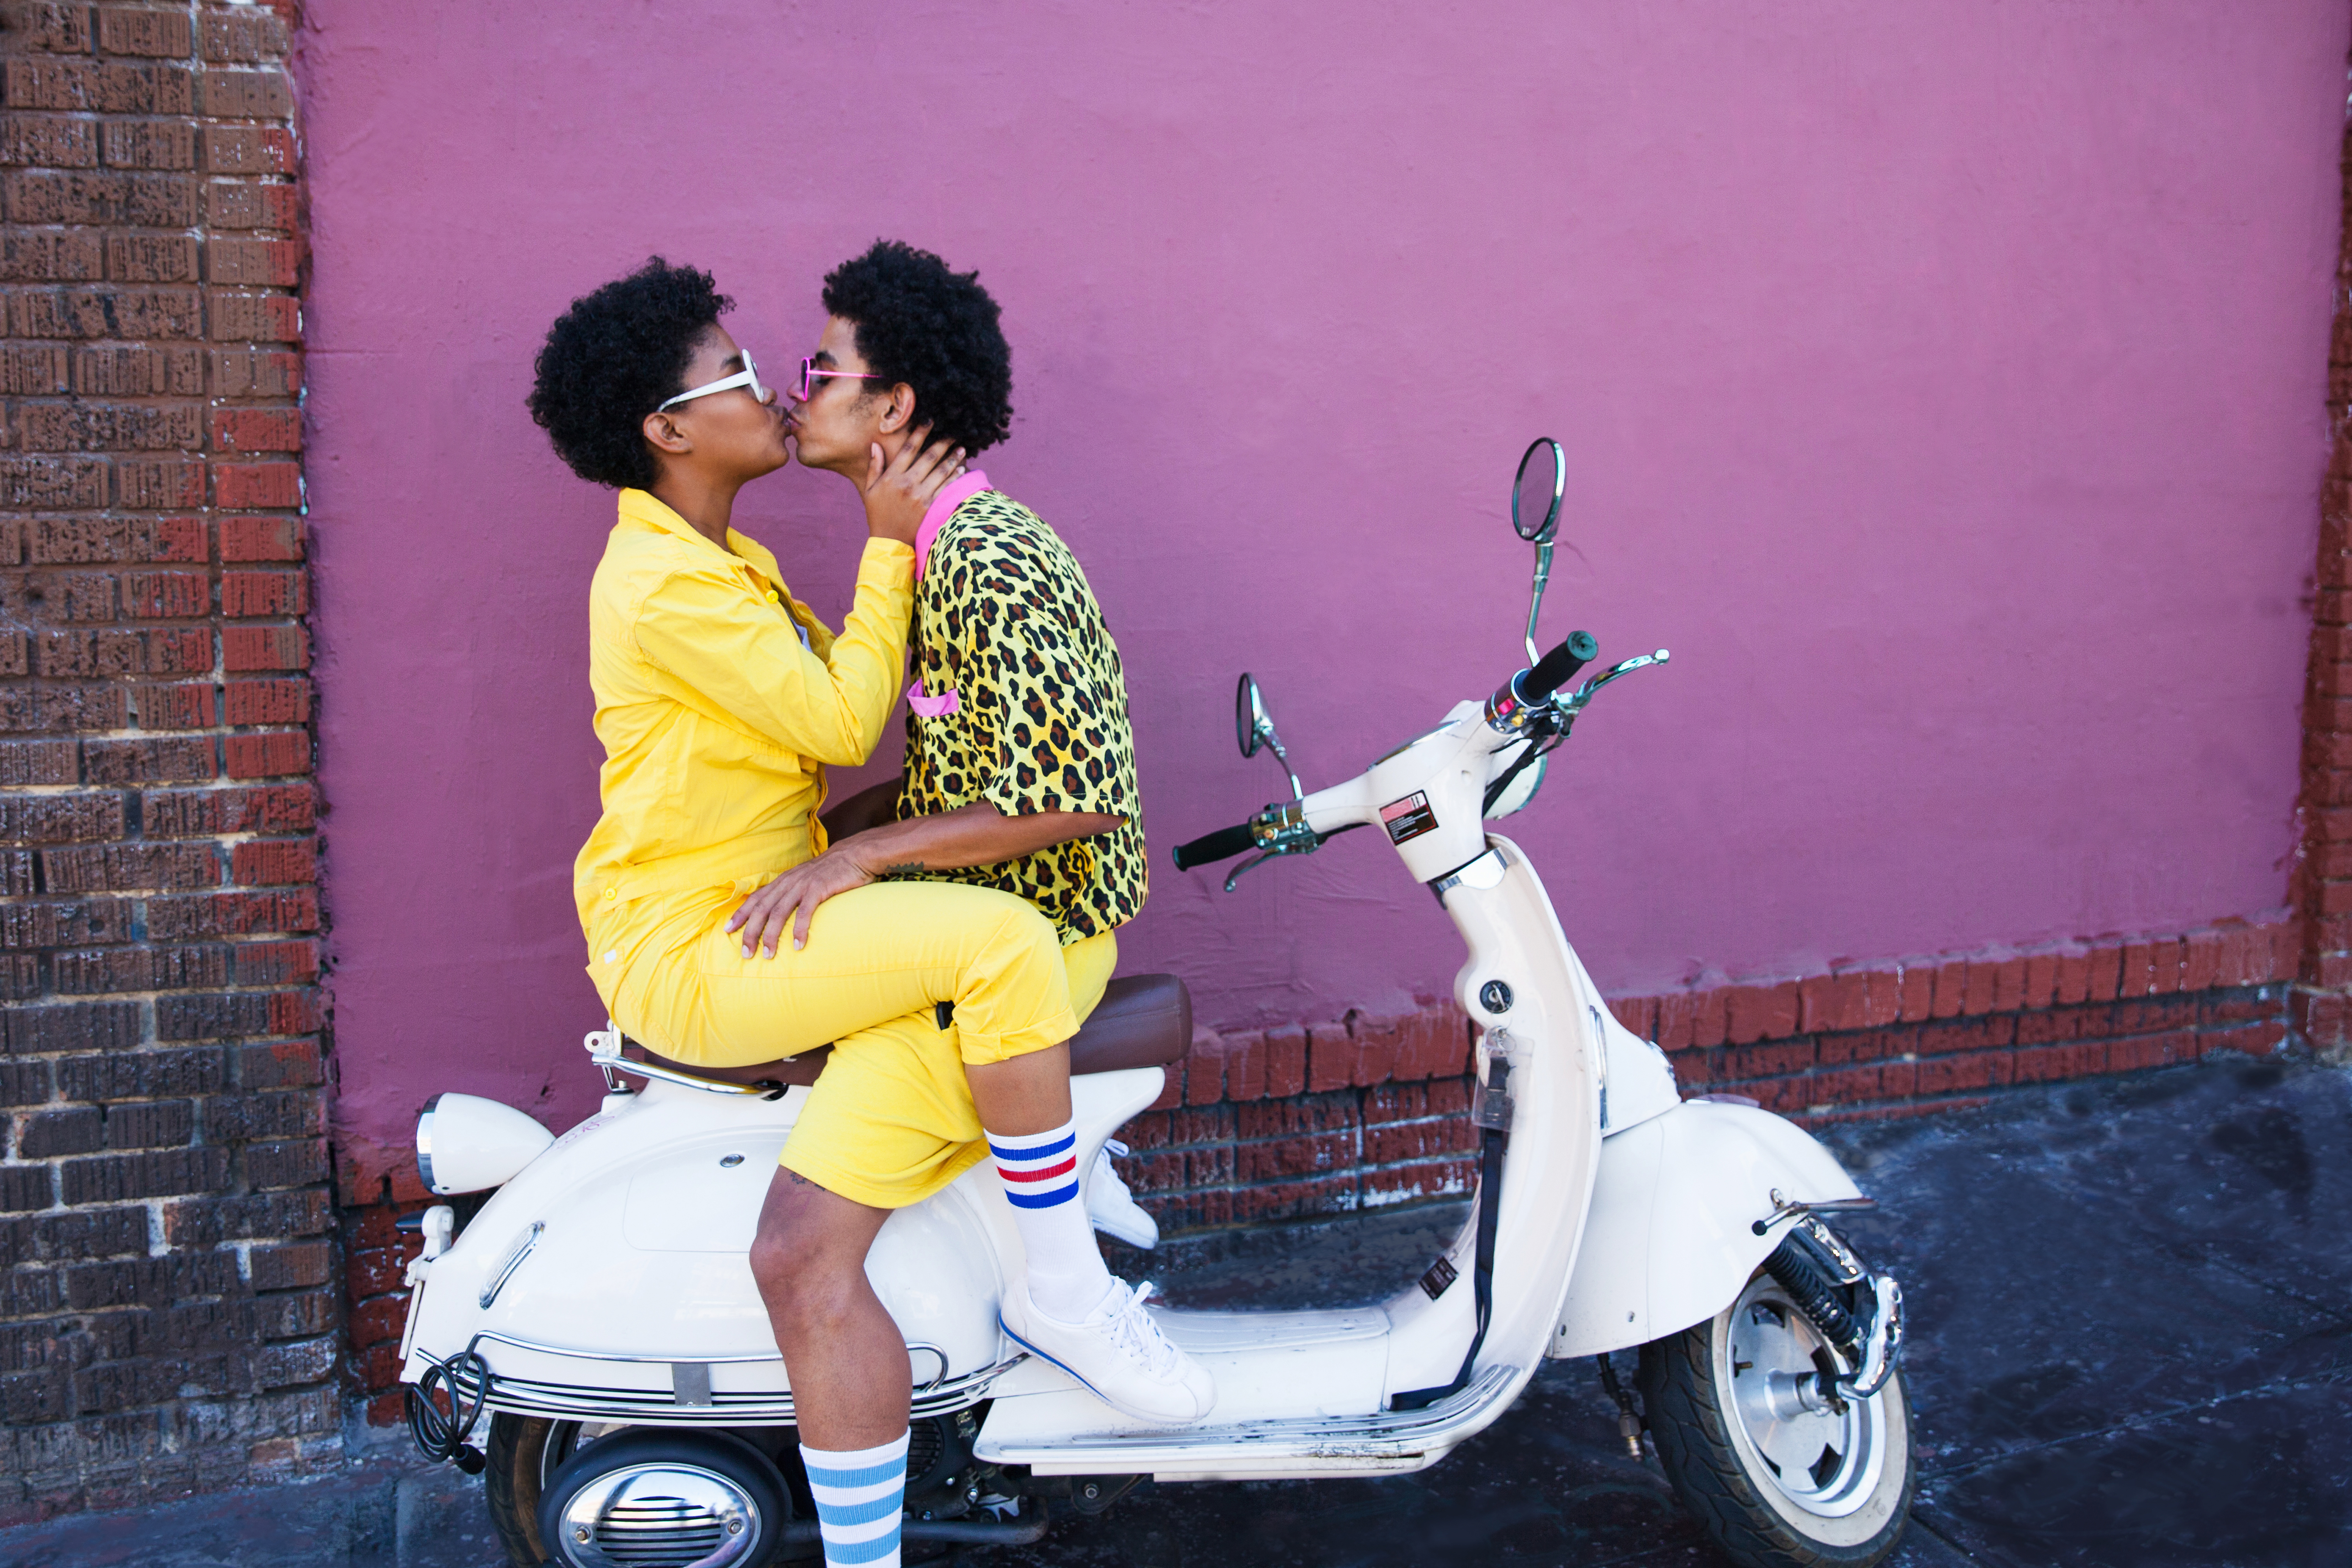 A woman and man kissing on a Vespa. | Source: Getty Images